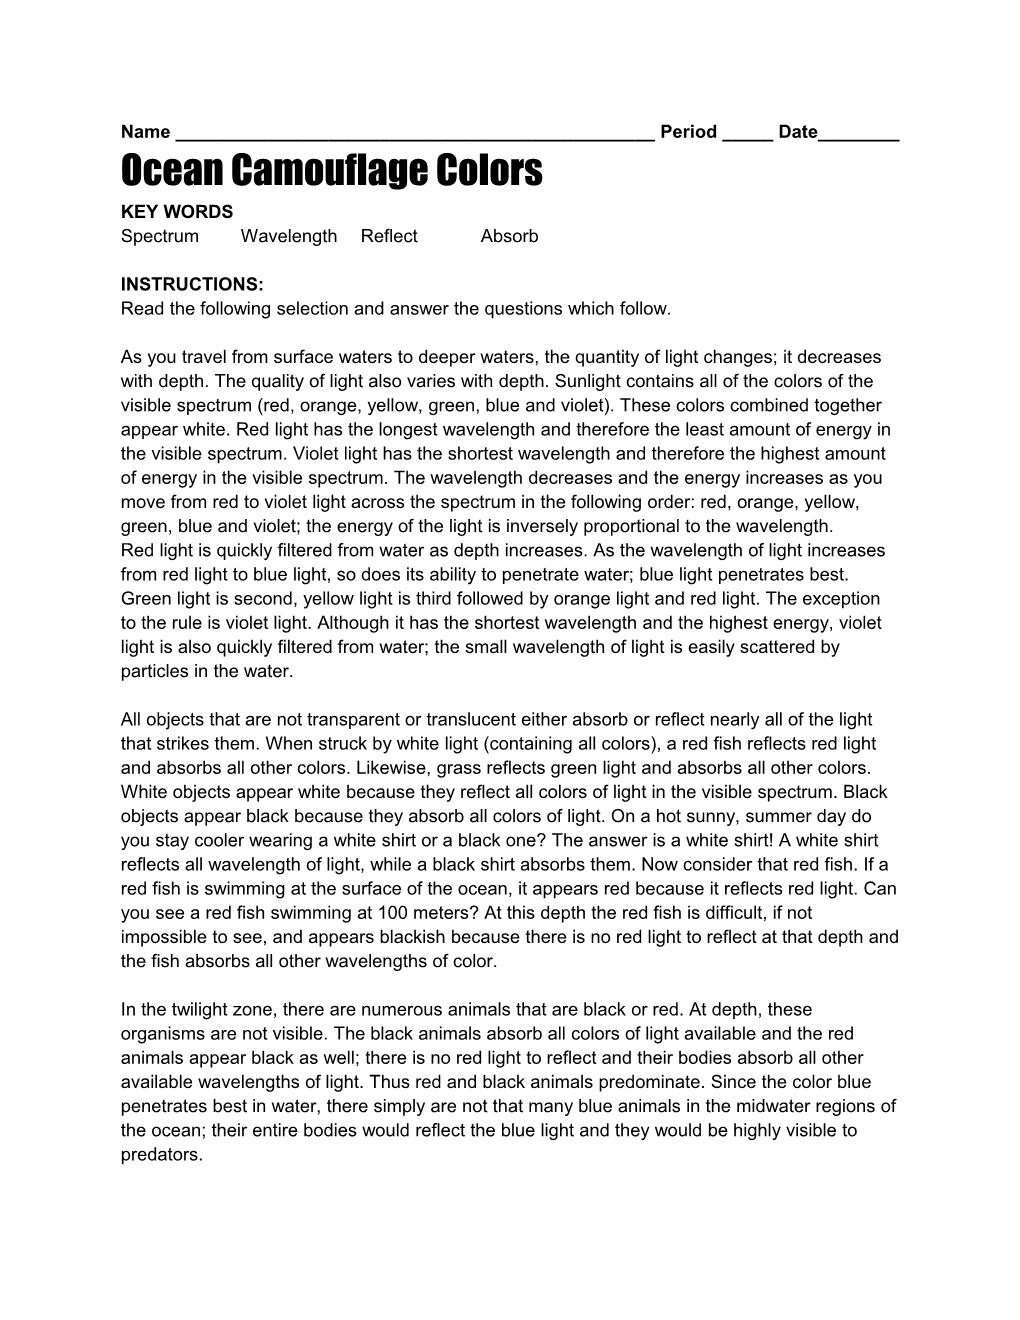 Ocean Camouflage Colors